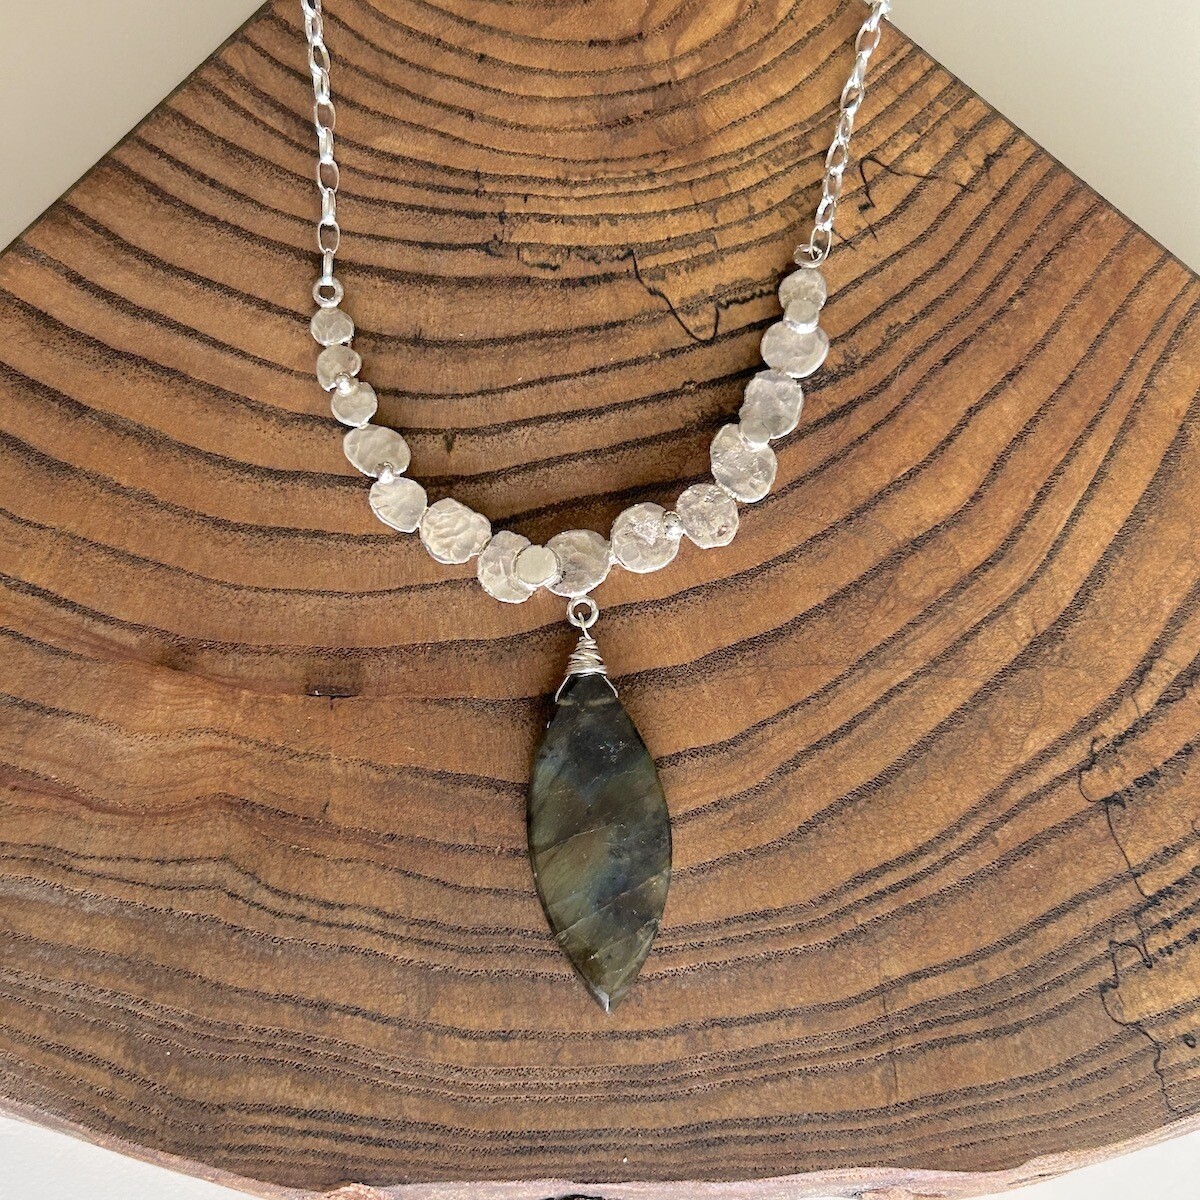 Handmade Silver Necklace with recycled hammered silver pebbles, large marquise labradorite